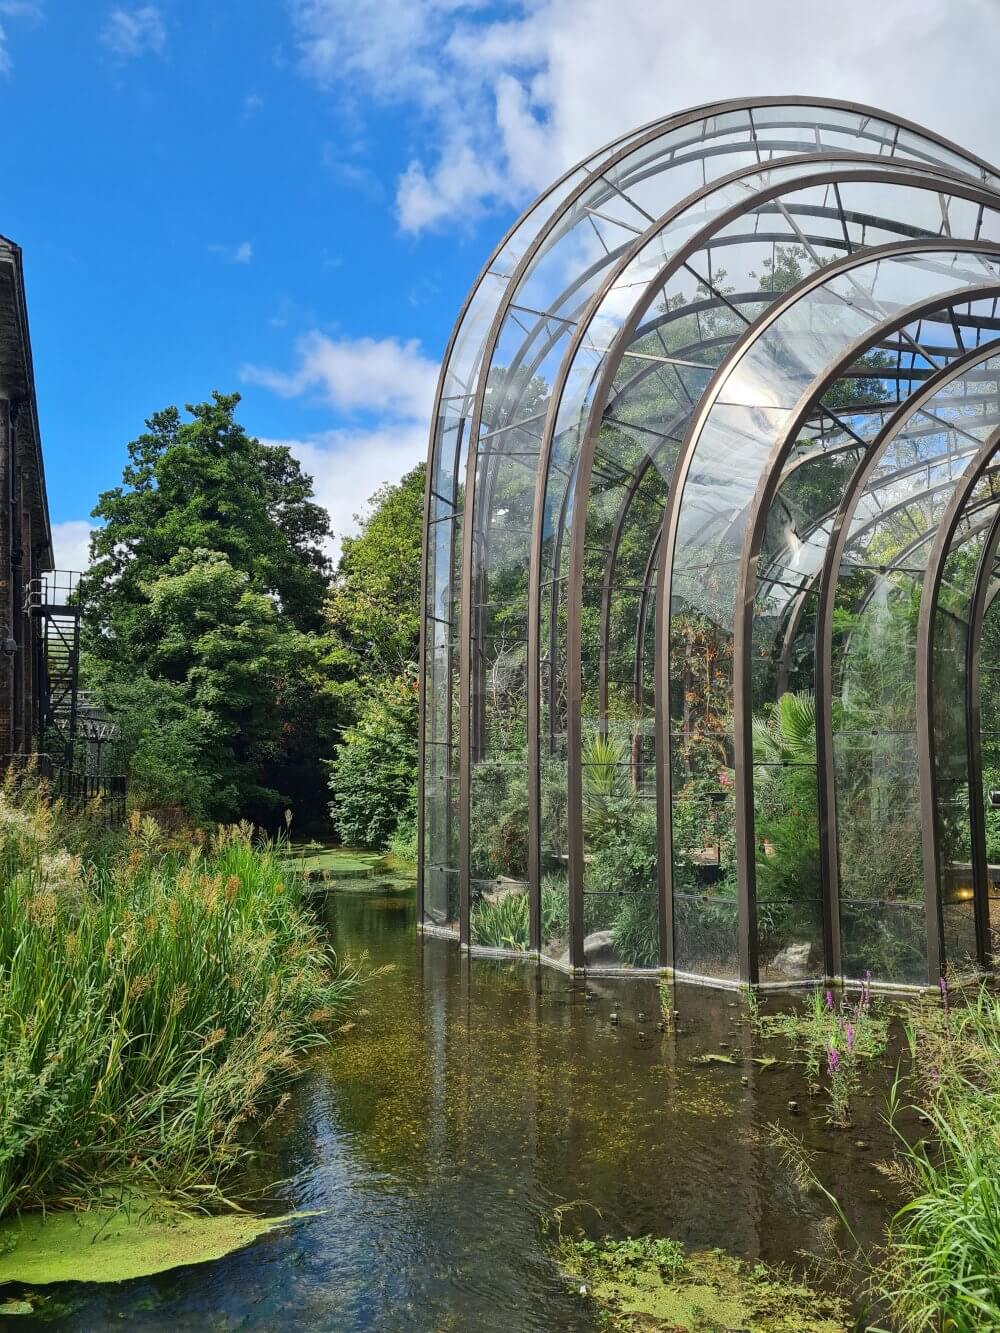 The Glasshouses at Bombay Sapphire in Laverstoke